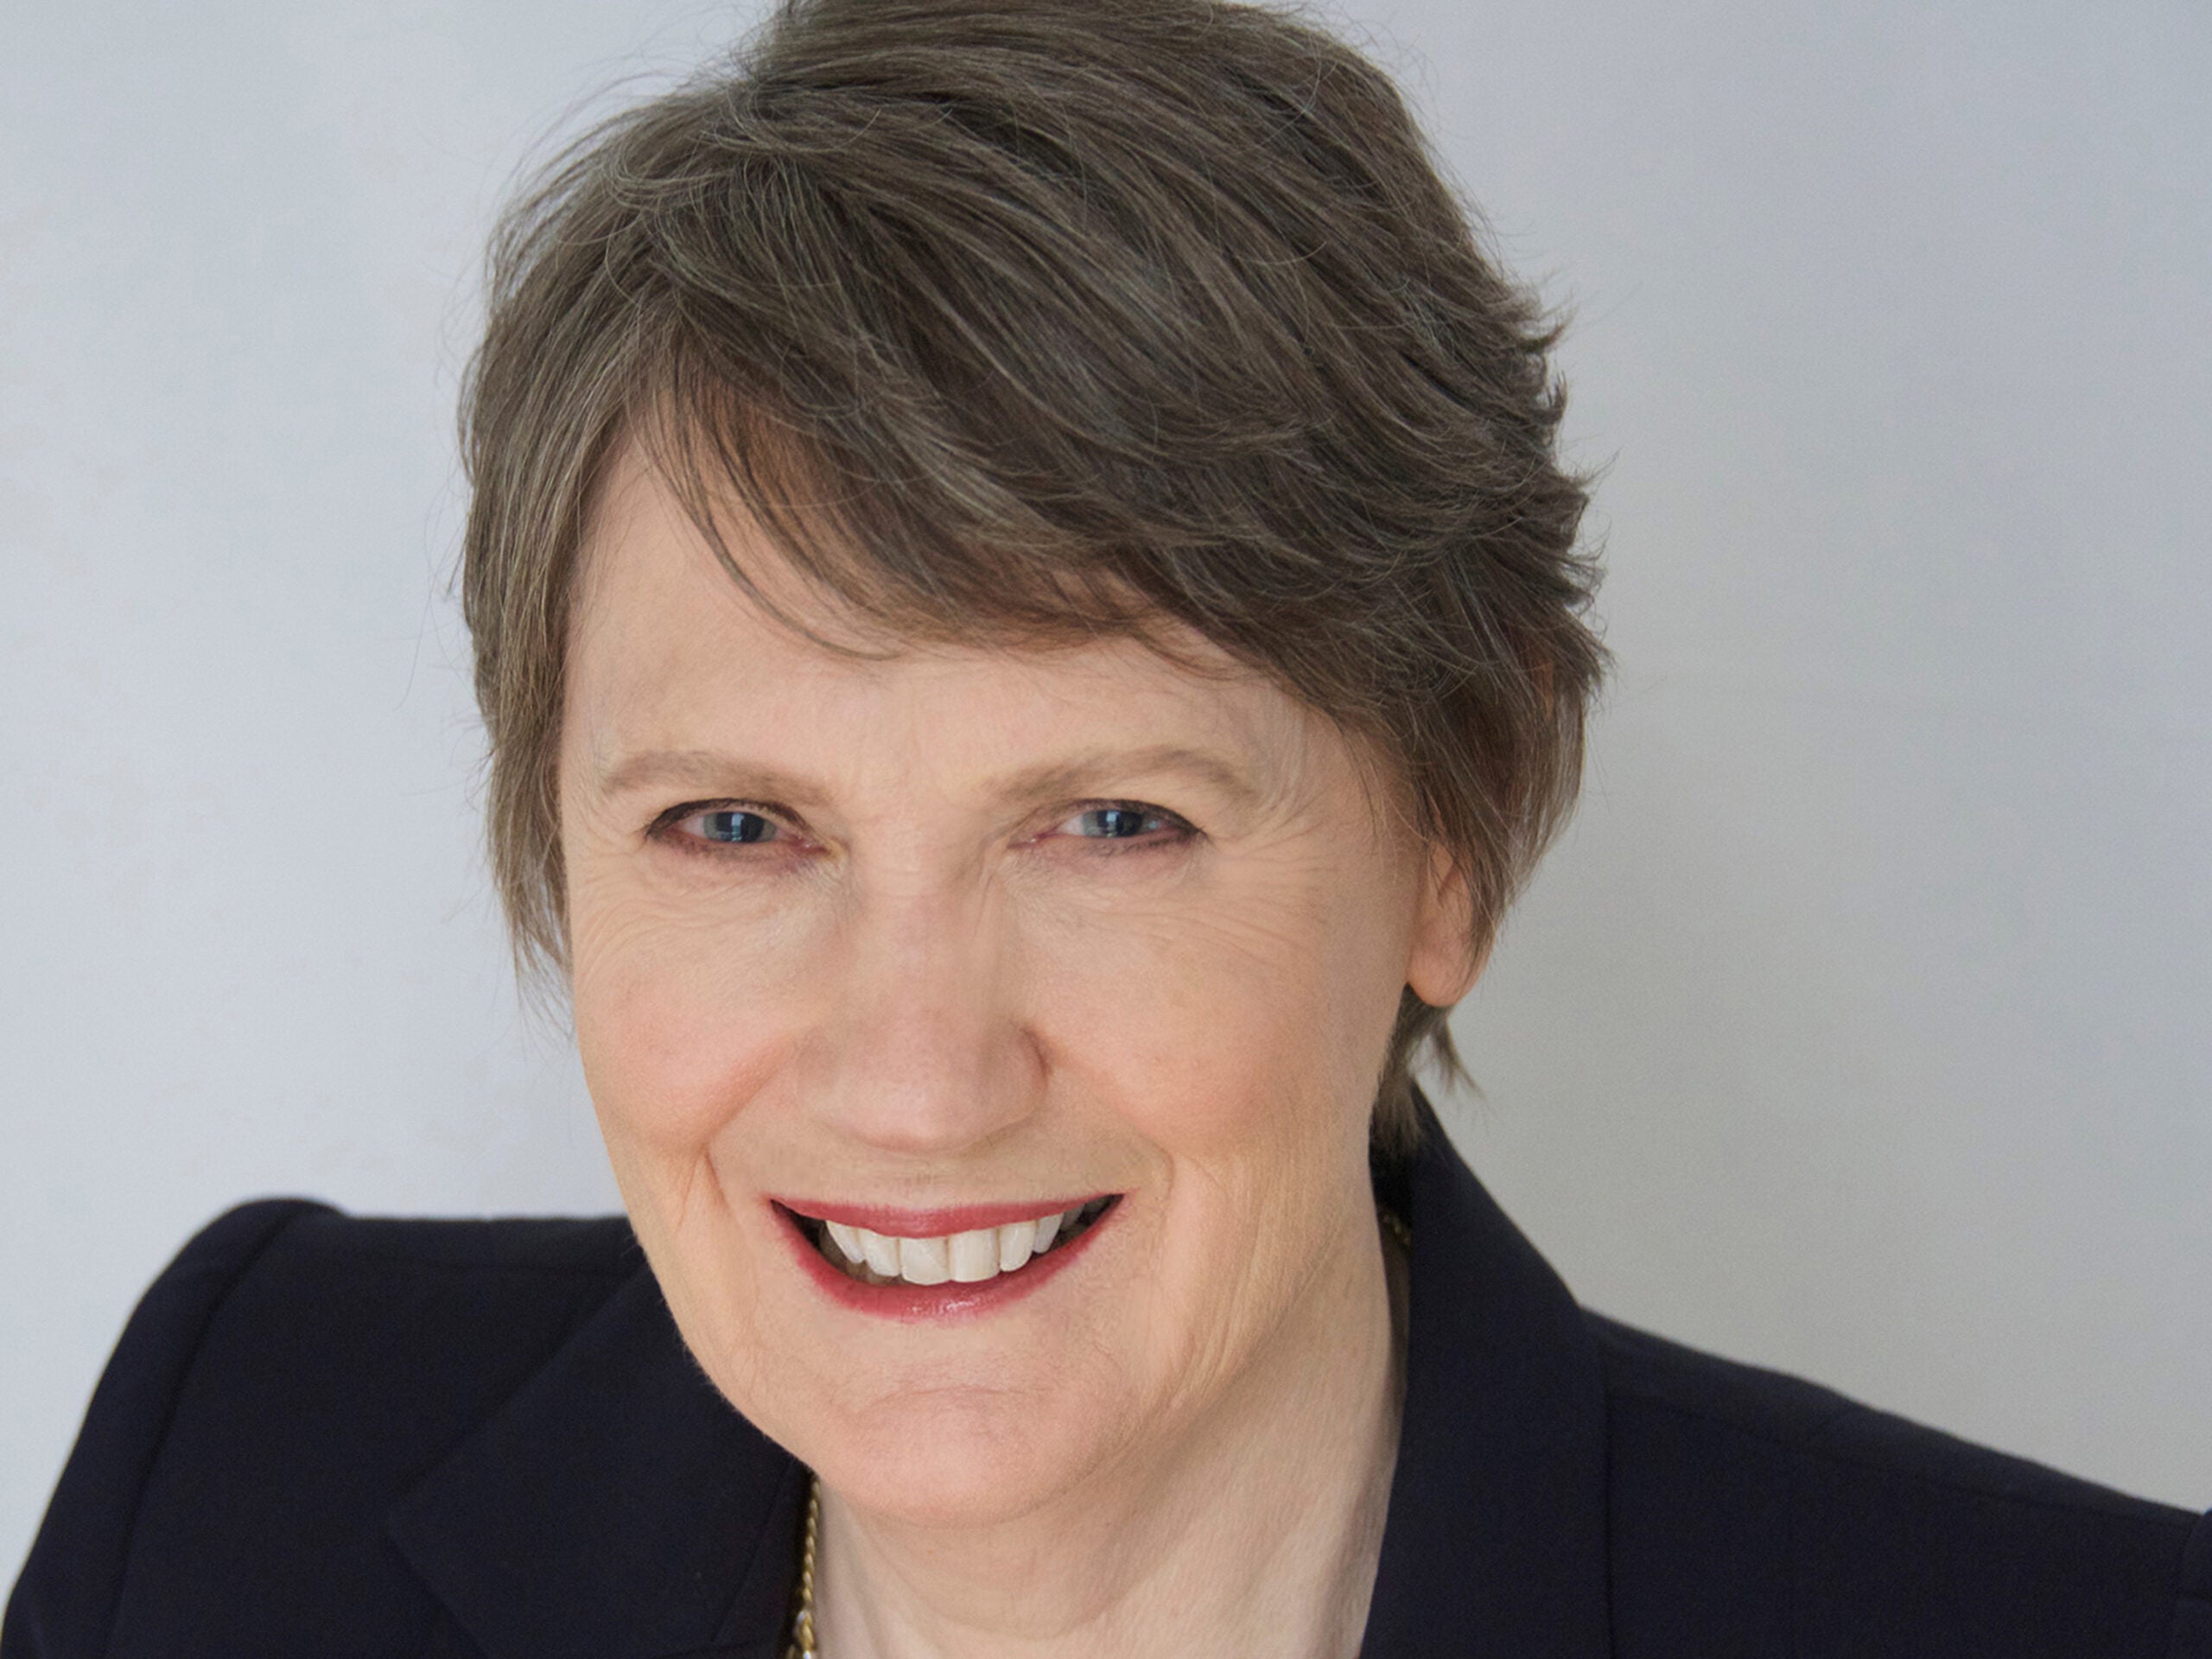 Helen Clark, Prime Minister of New Zealand from 1999 to 2008